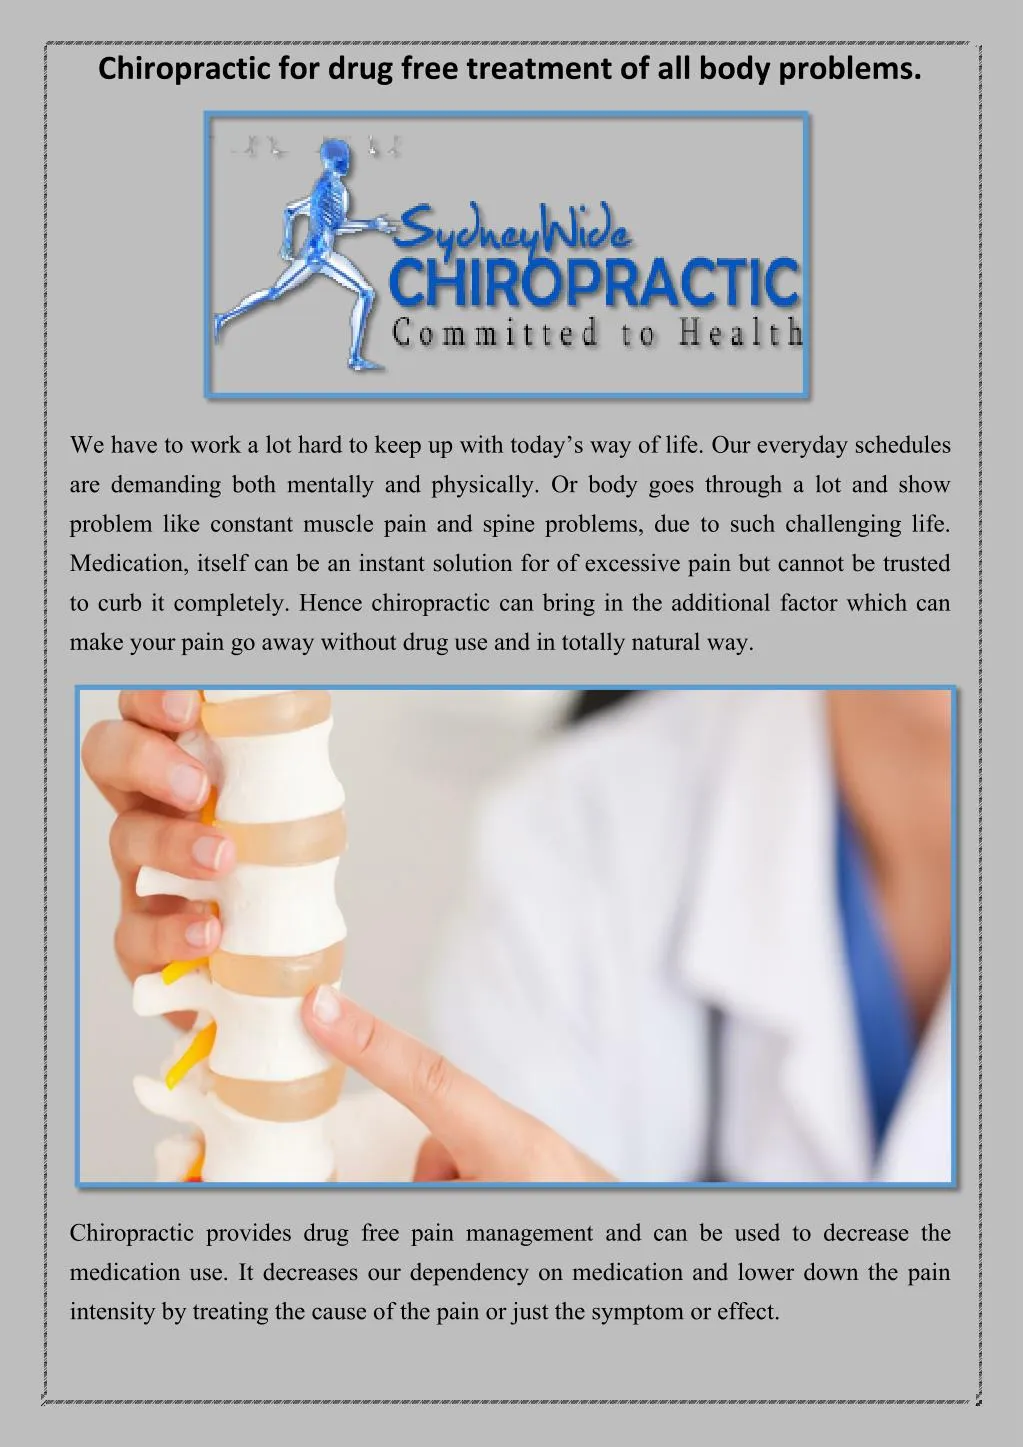 chiropractic for drug free treatment of all body